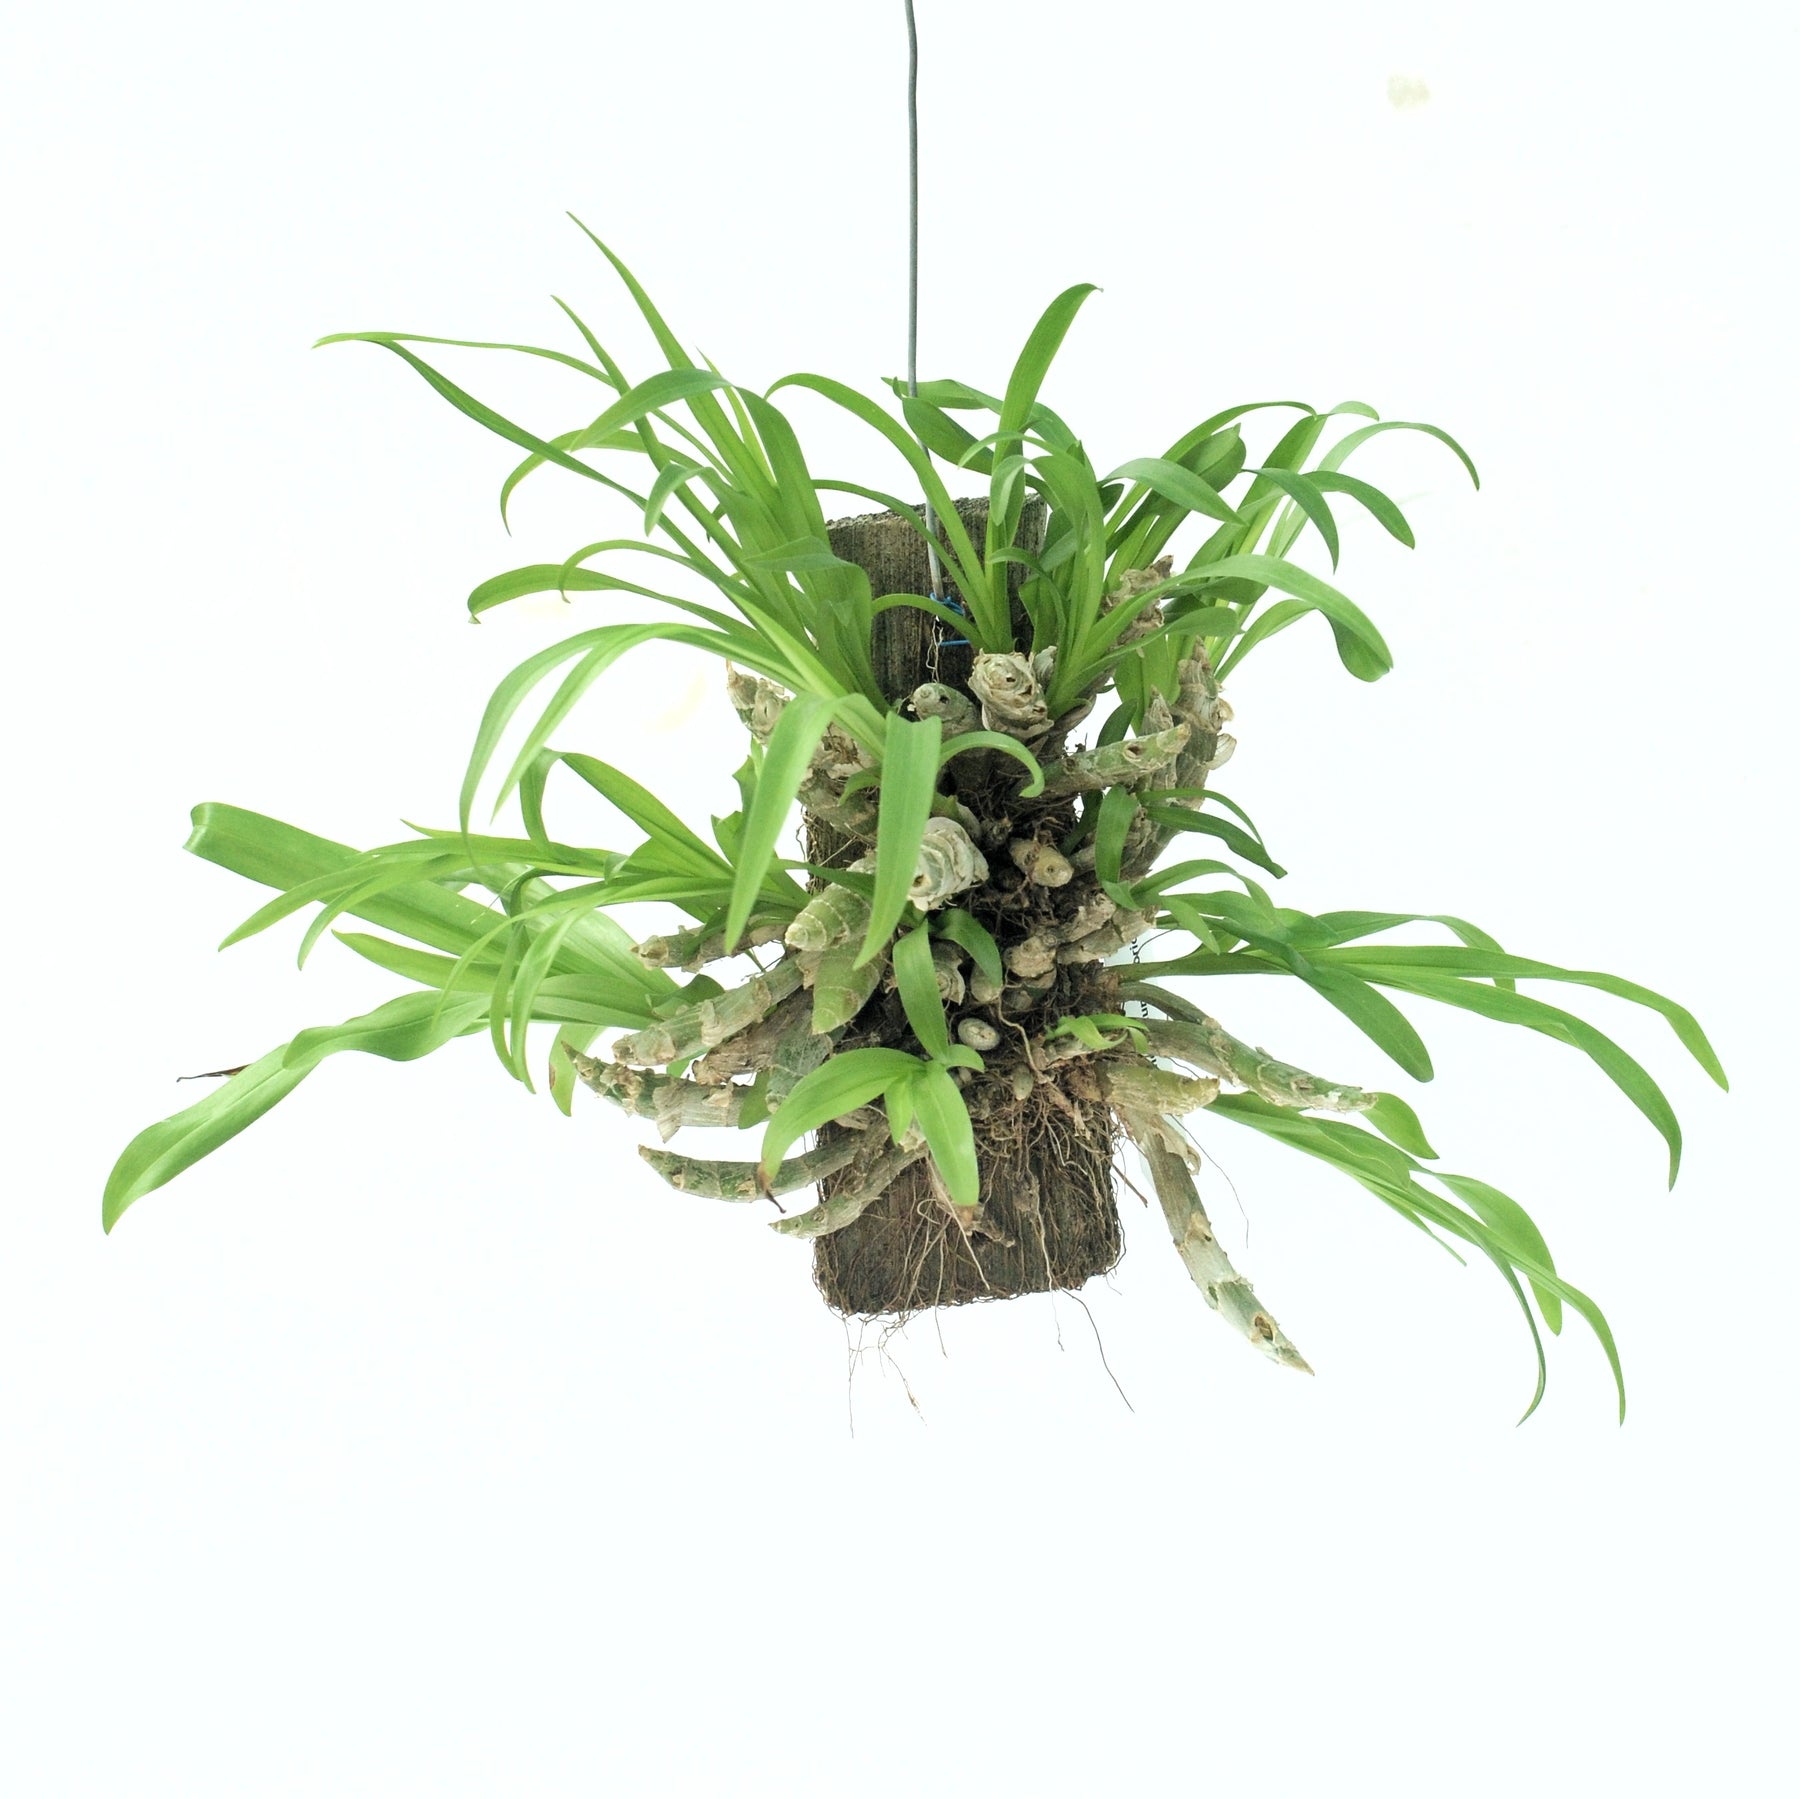 Eria obesa (Pinalia Obesa) Orchid Plant - Adorable and Compact Orchid with Unique Shape and Charming Blooms - Order Now